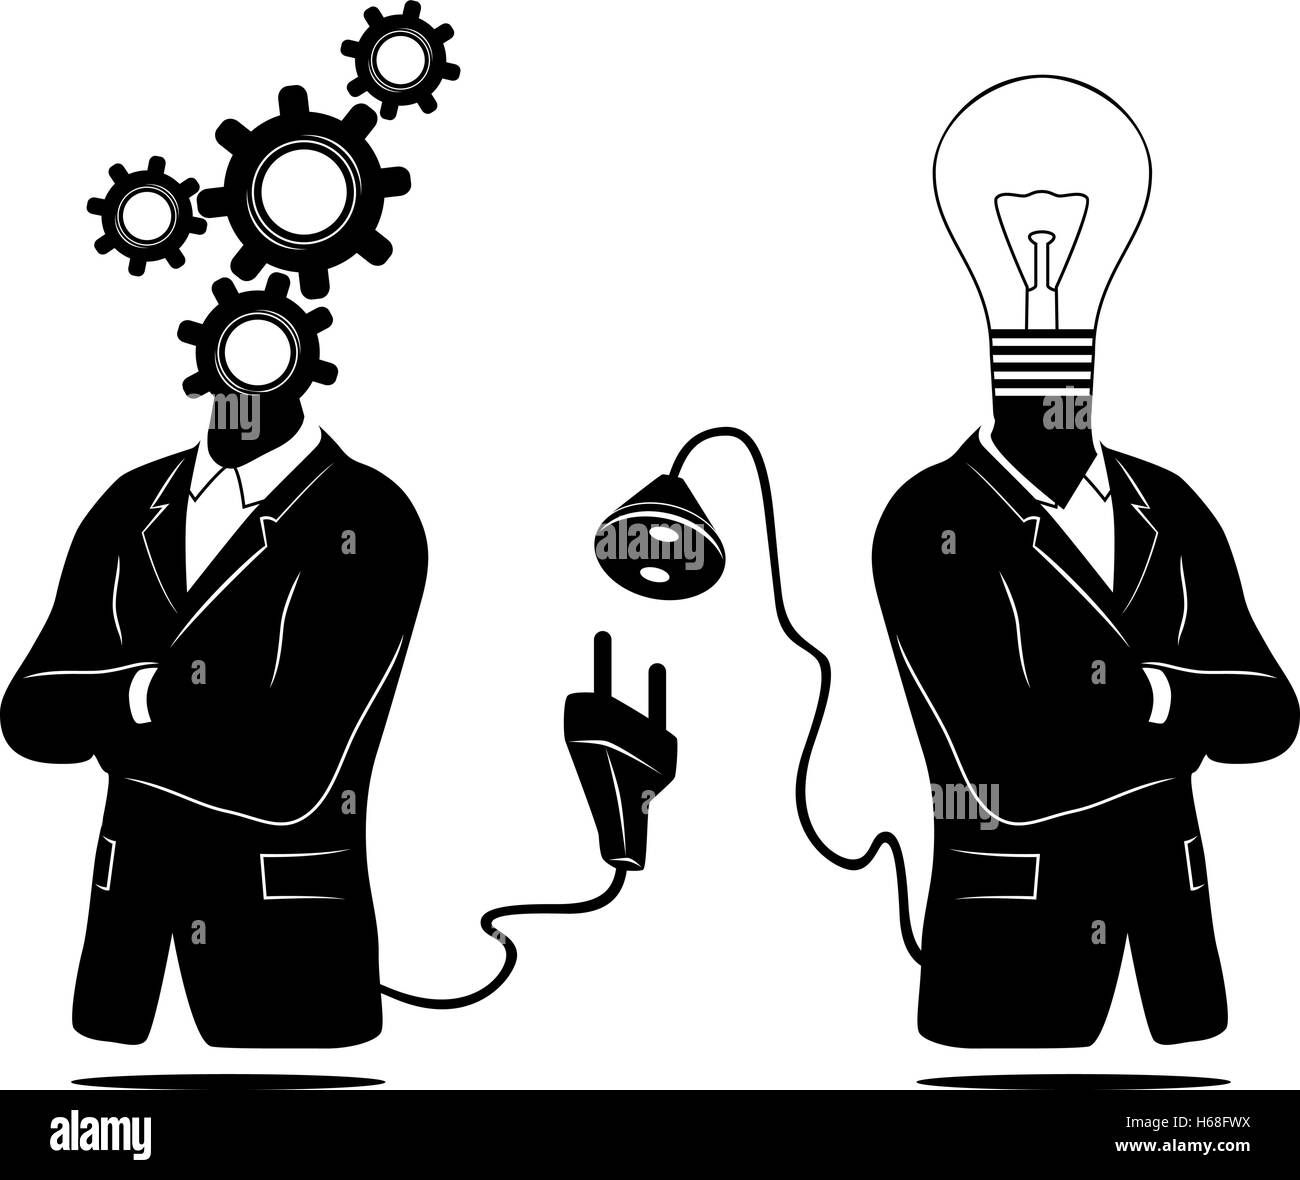 Searching and finding idea / solution in teamwork / network. Stock Vector